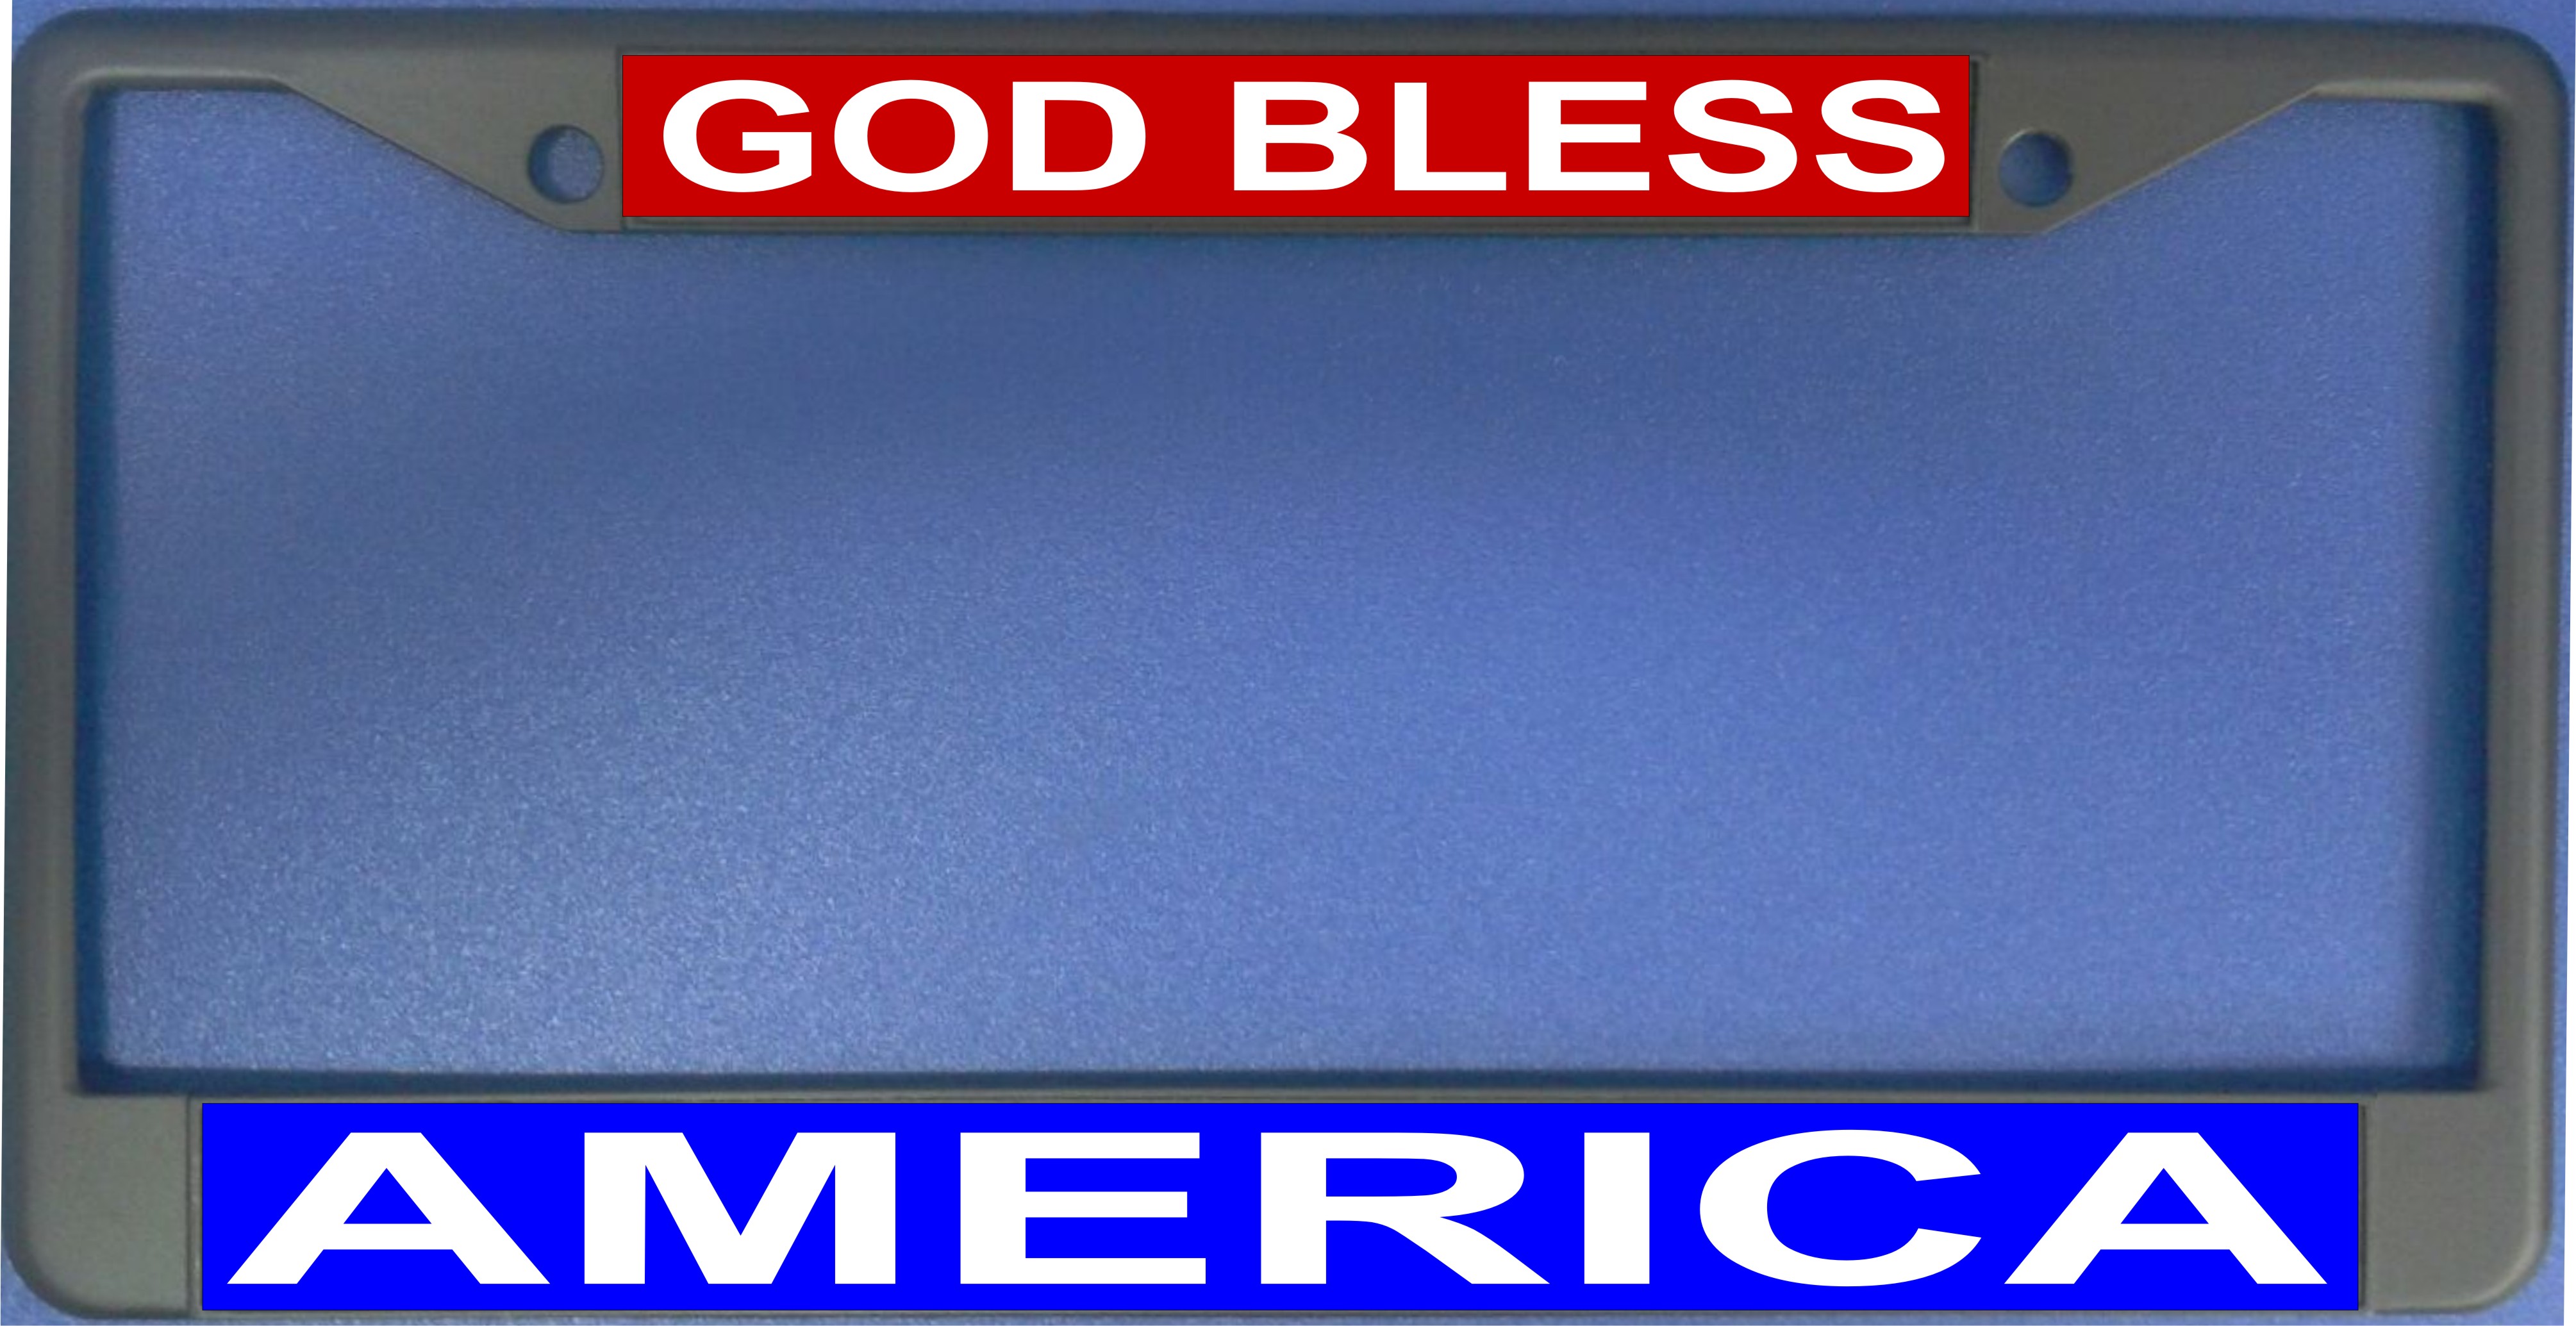 God Bless America License Plate Frame Free SCREW Caps Included